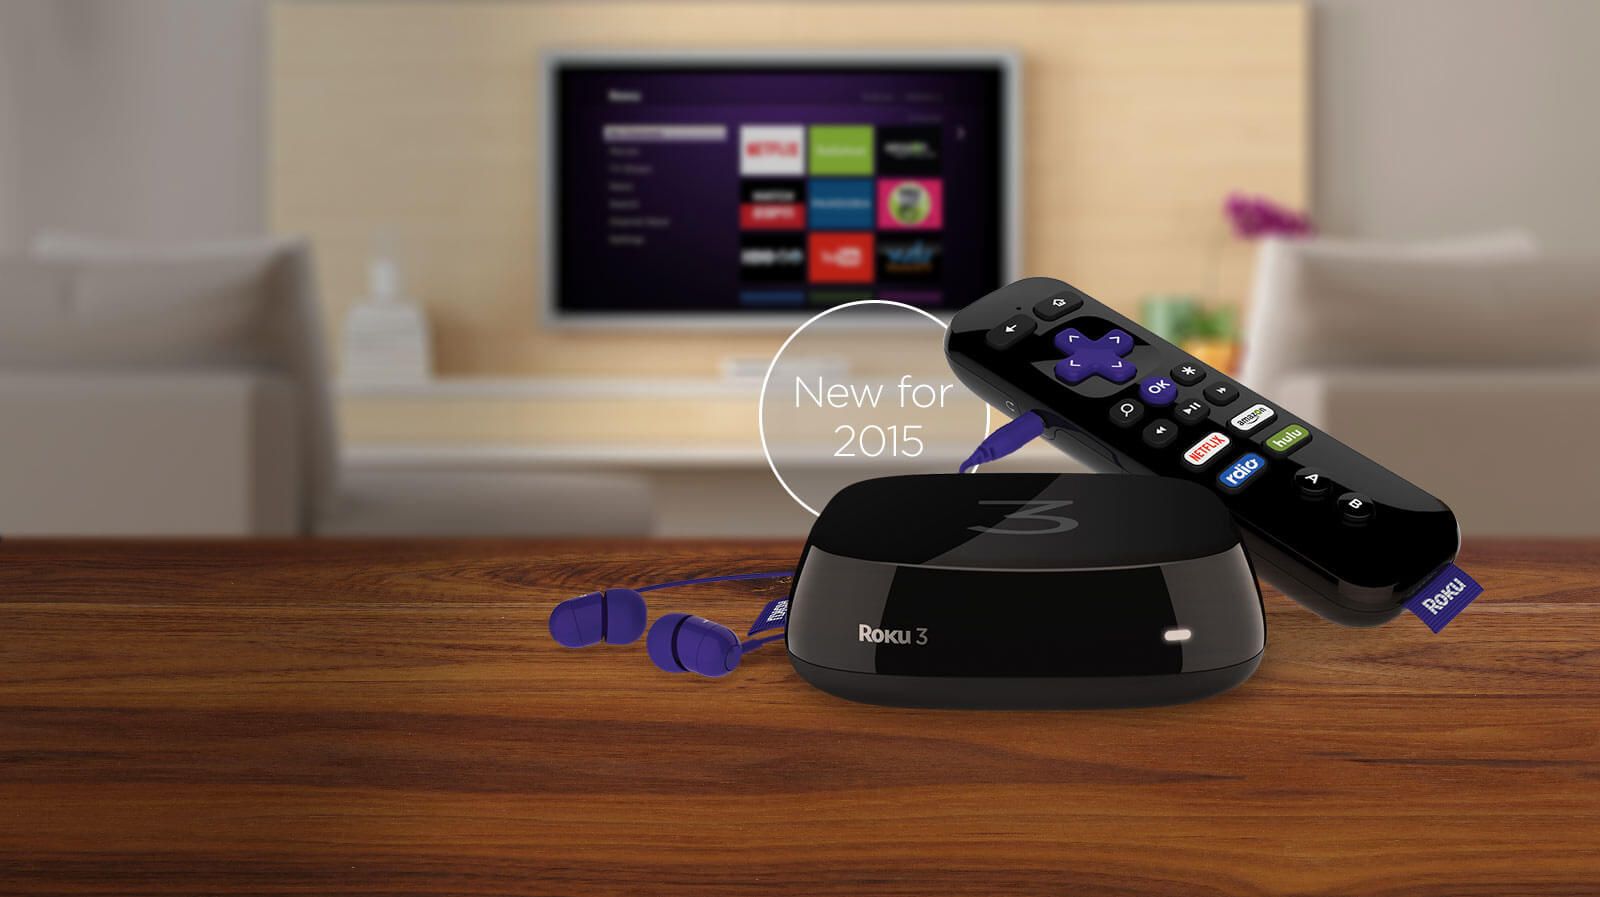 New Roku 3: Fantastic, affordable streaming device now with more features